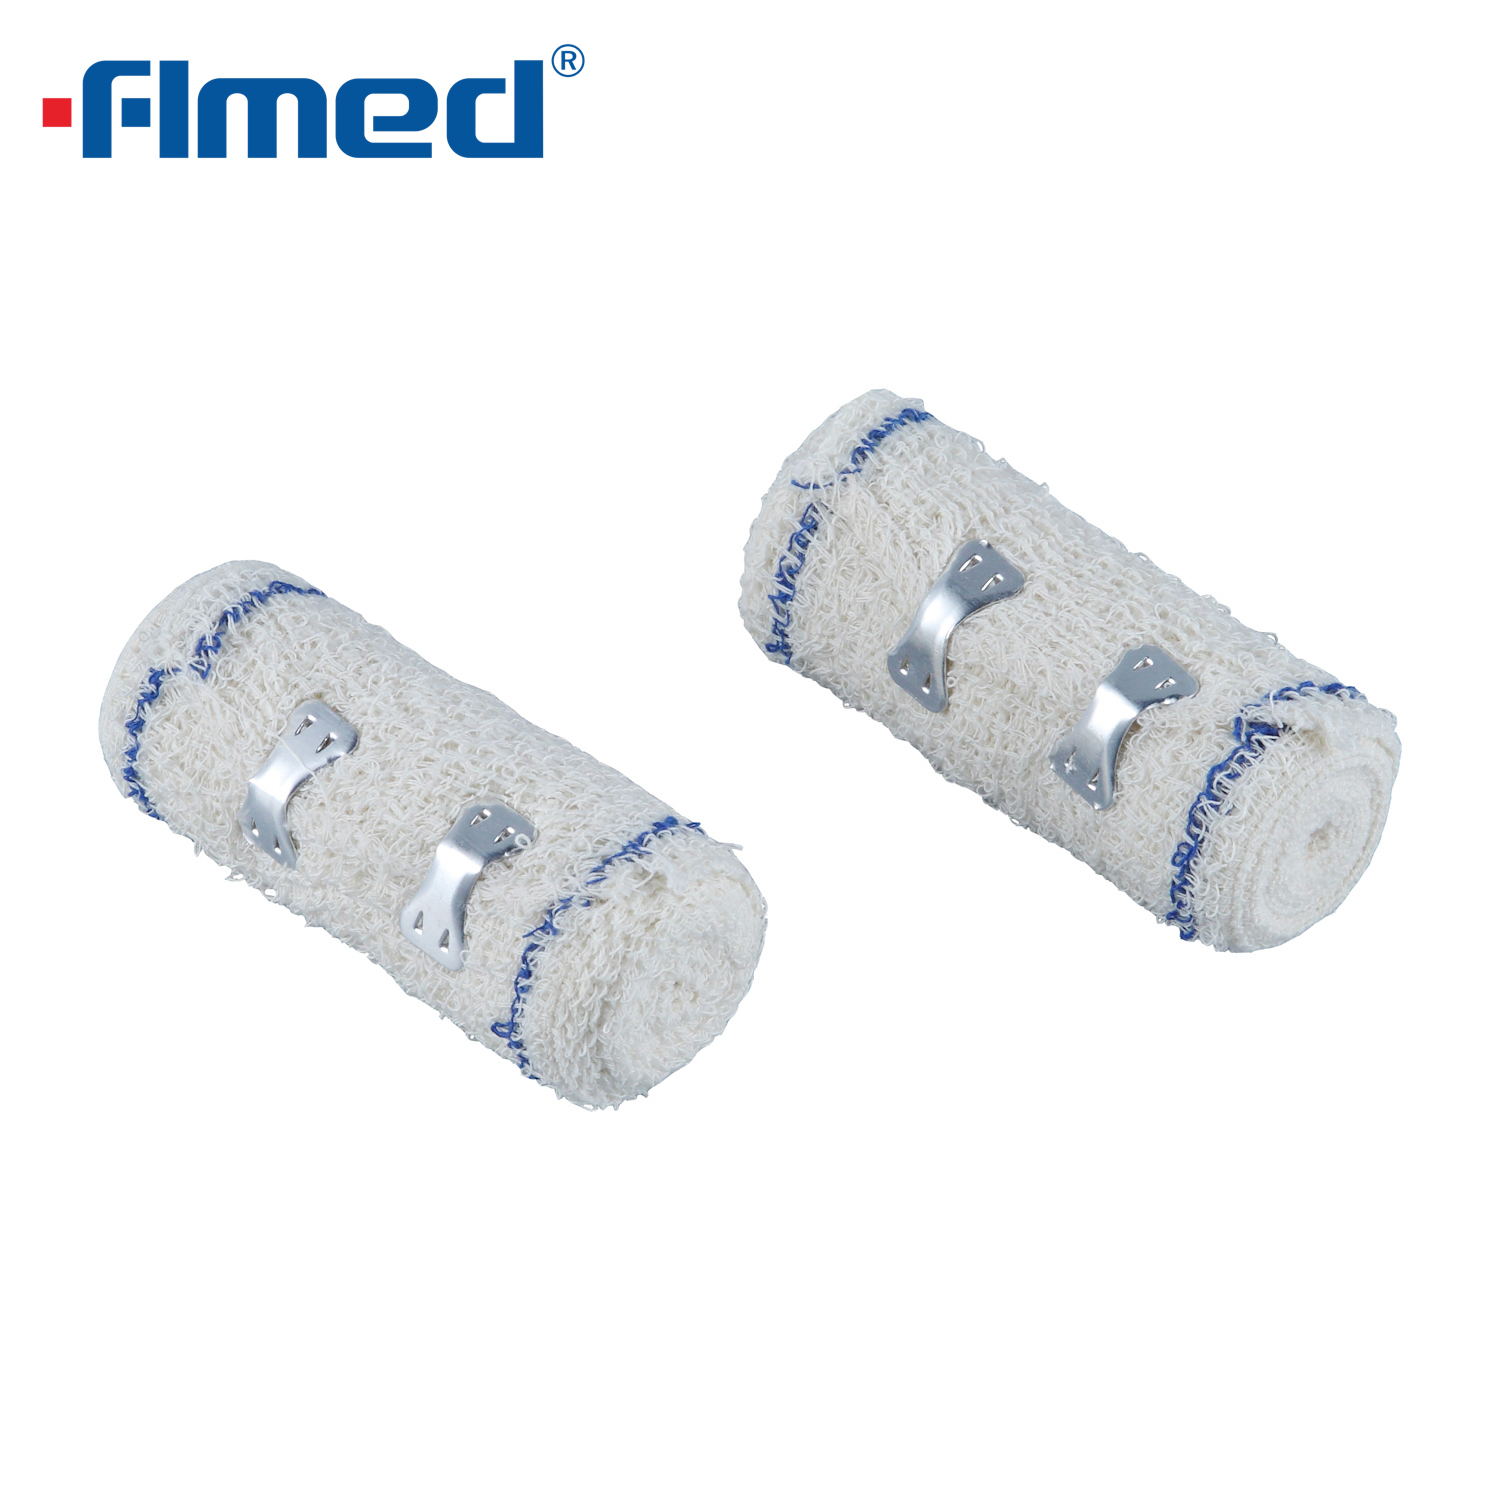 Soft Breathable And Comfortable Cotton And Spandex Crepe Bandage for Fixing Wounds Plain Bandage Elastic Bandage Clips